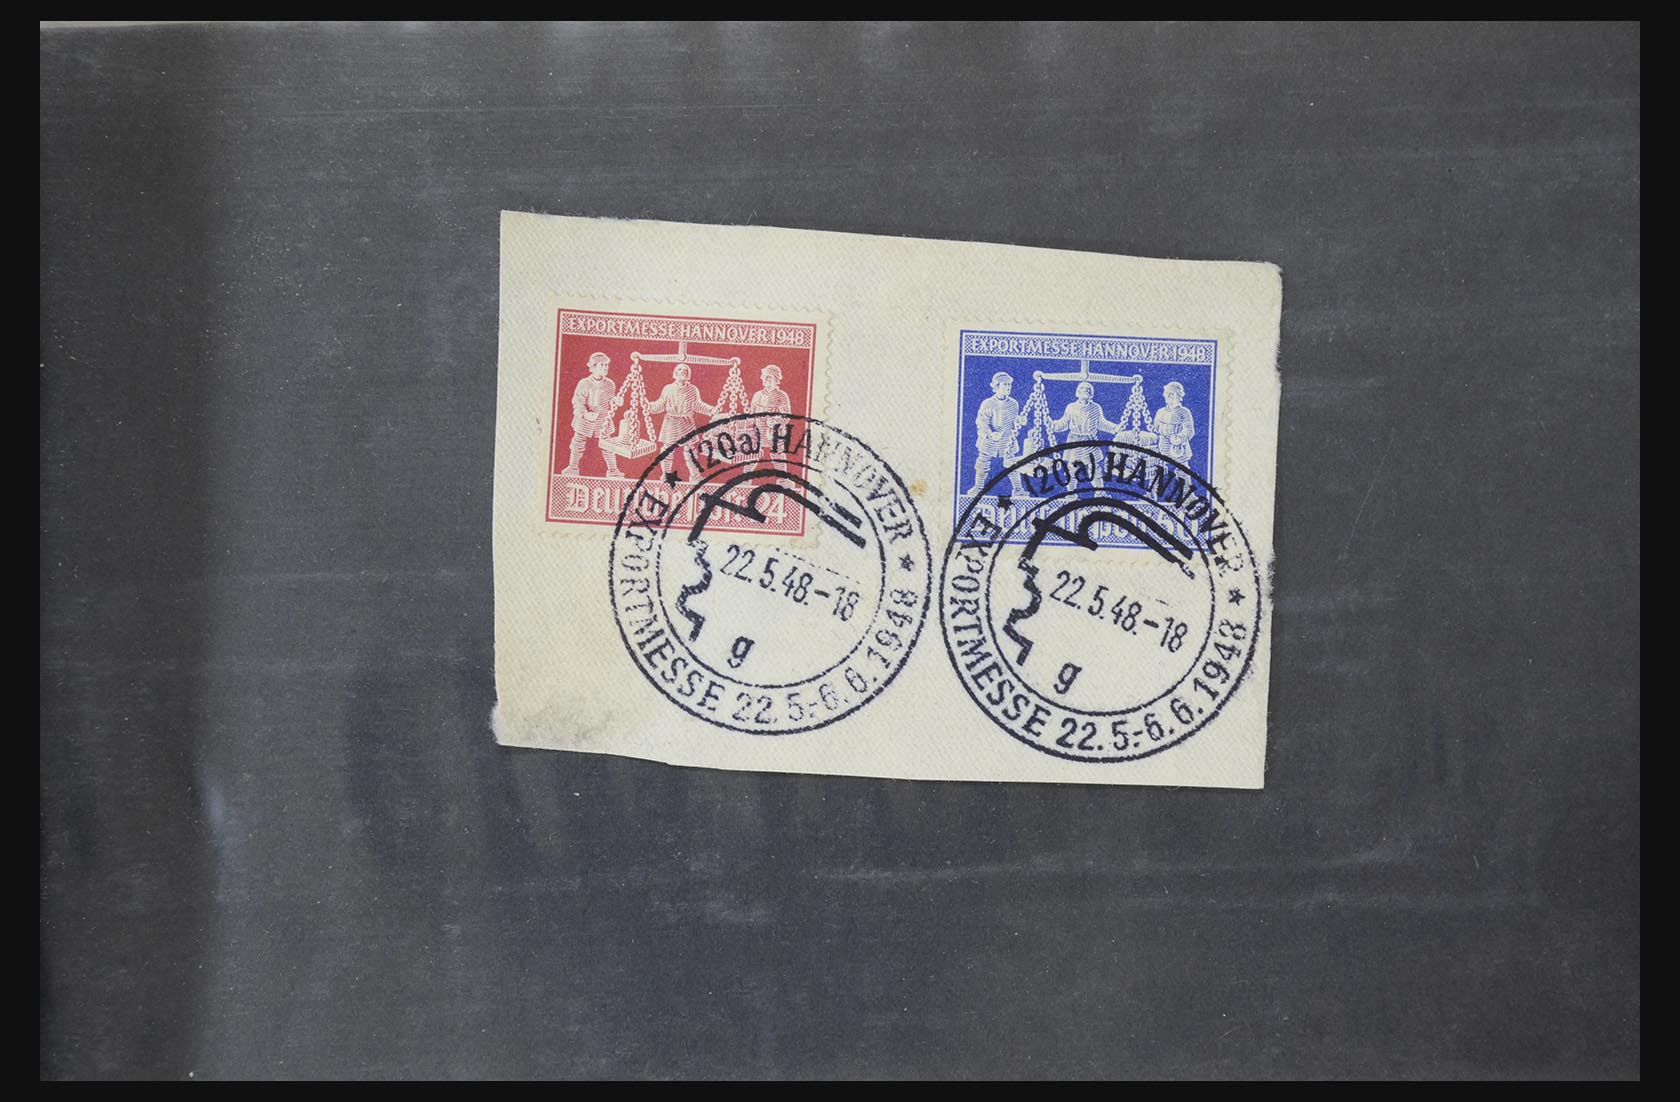 31581 005 - 31581 Germany covers and FDC's 1945-1981.